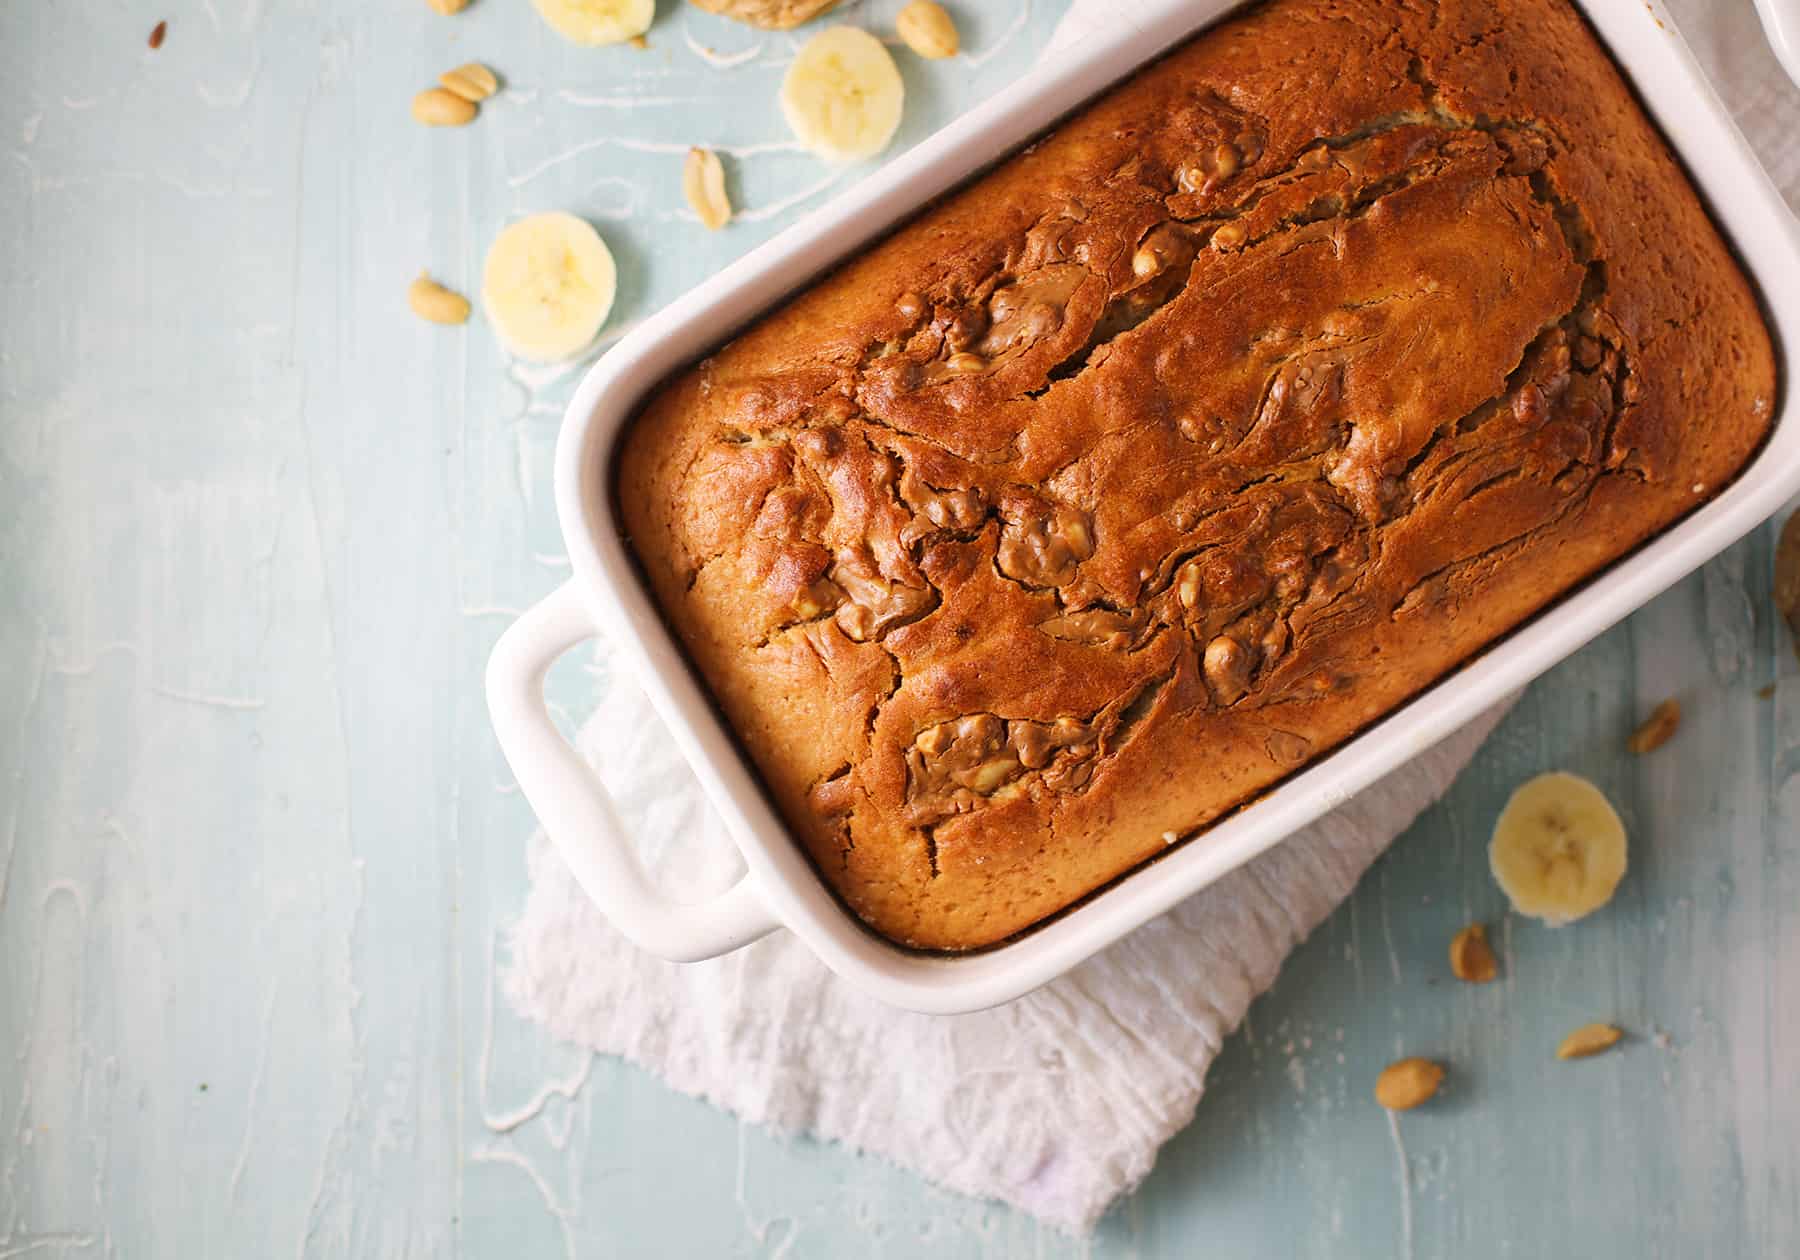 Healthy Peanut Butter Banana Bread (sweetened with maple syrup and bananas)